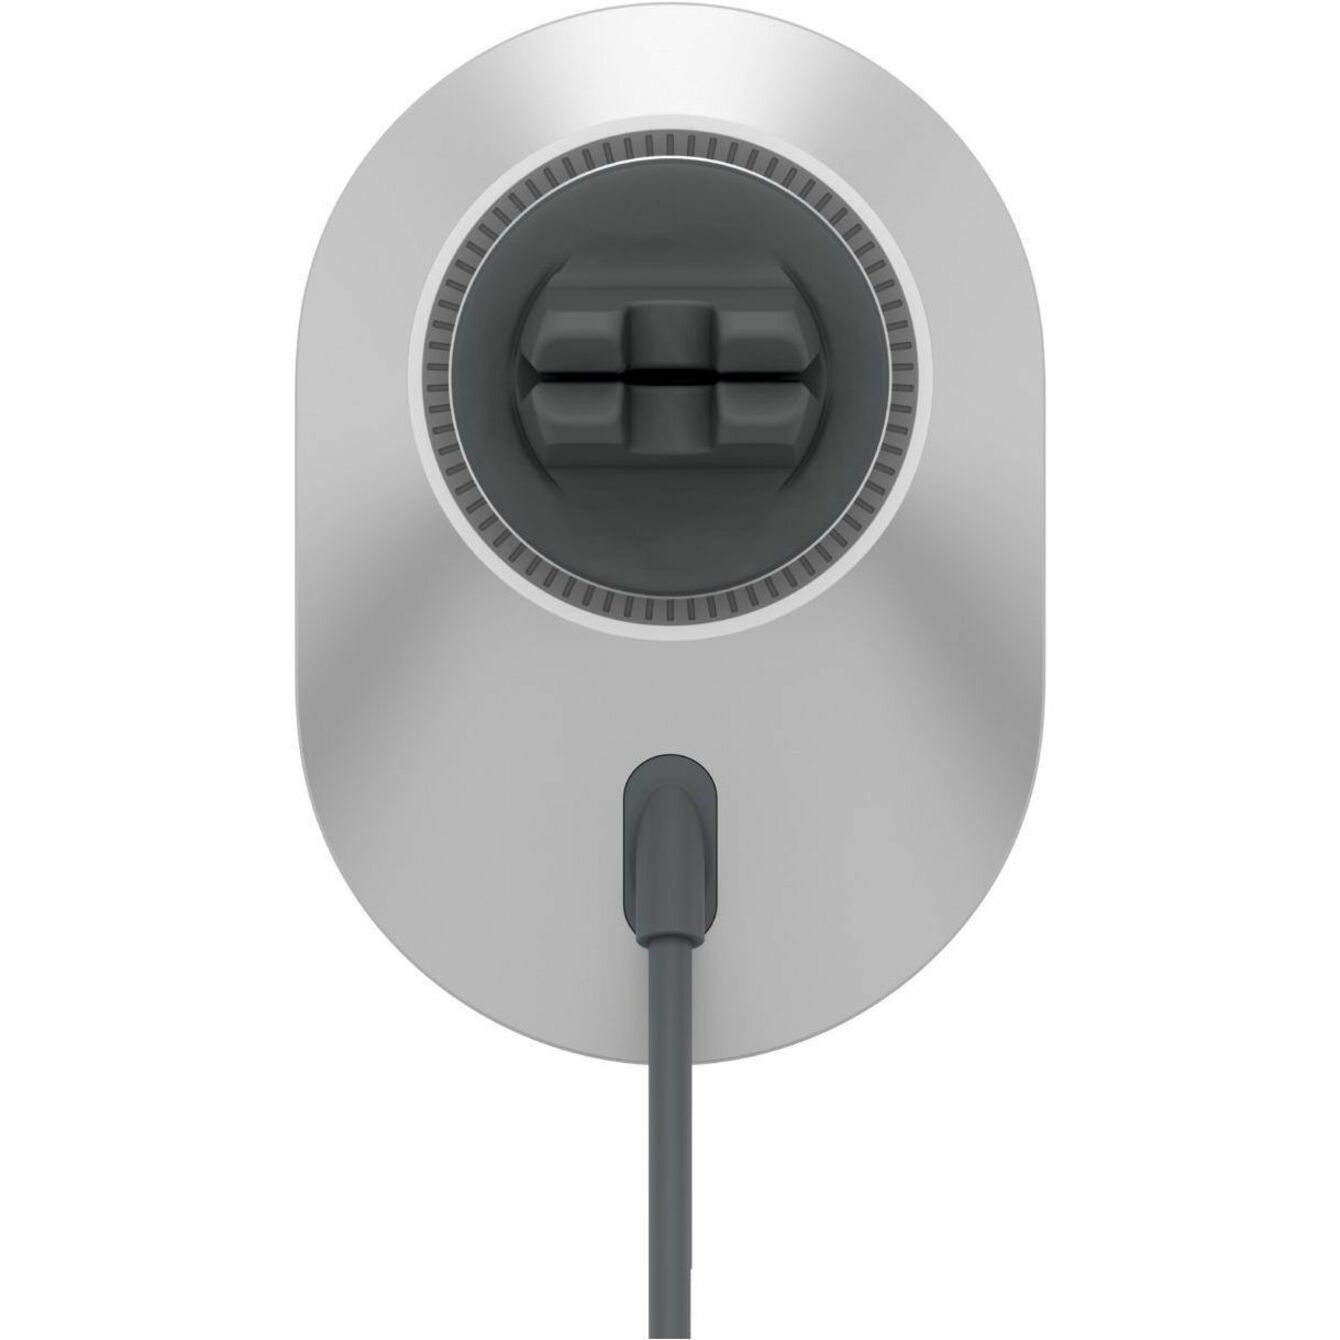 Belkin WIC008BTGR BoostCharge Pro Induction Charger, Magnetic, MagSafe Technology, Fast Charging